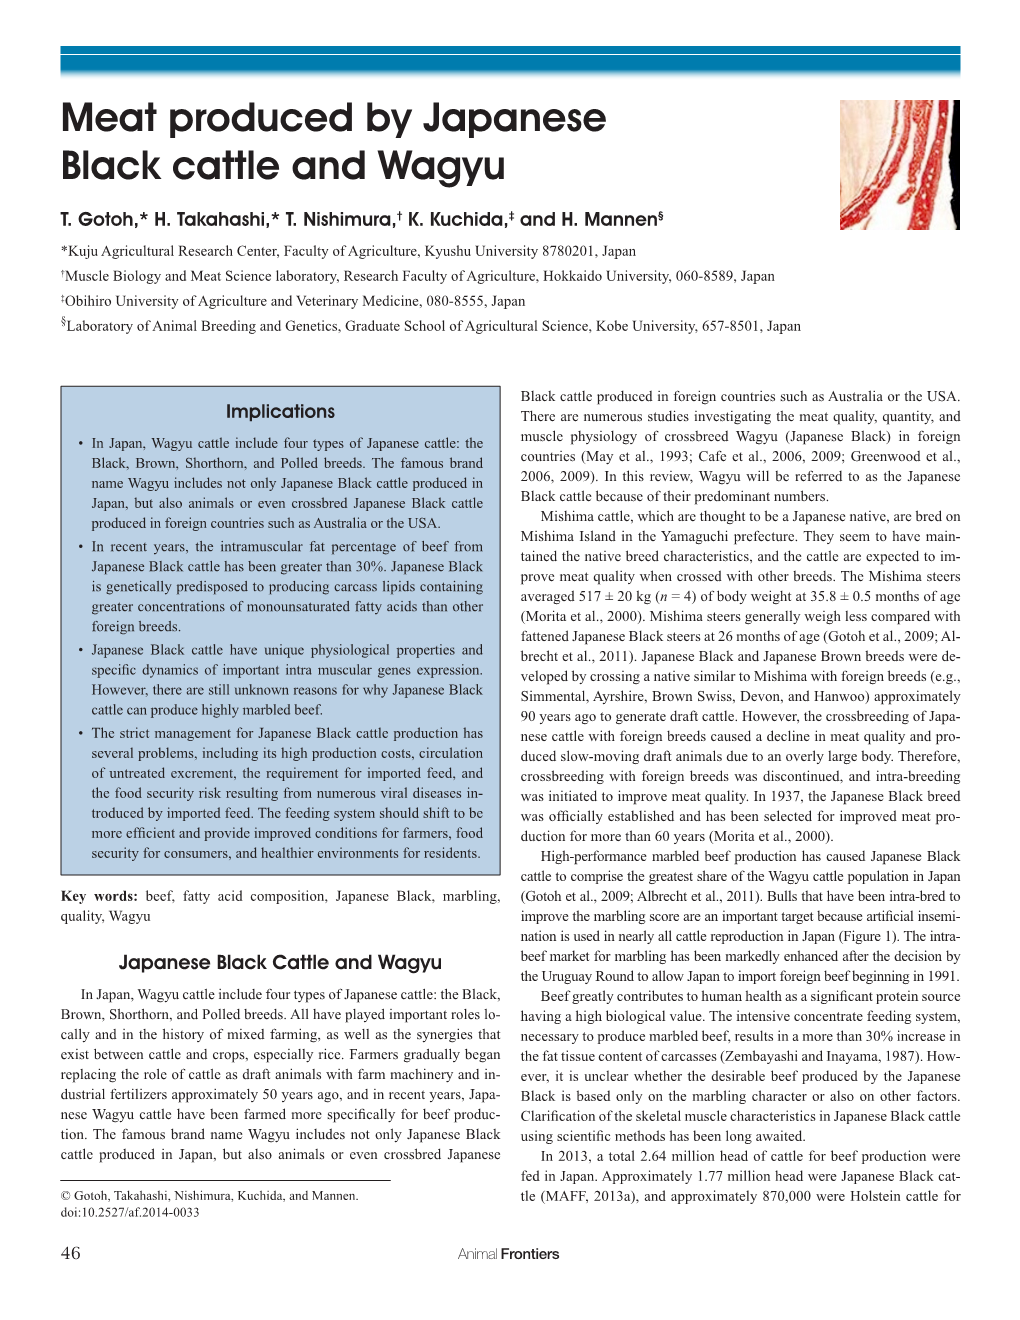 Meat Produced by Japanese Black Cattle and Wagyu Report